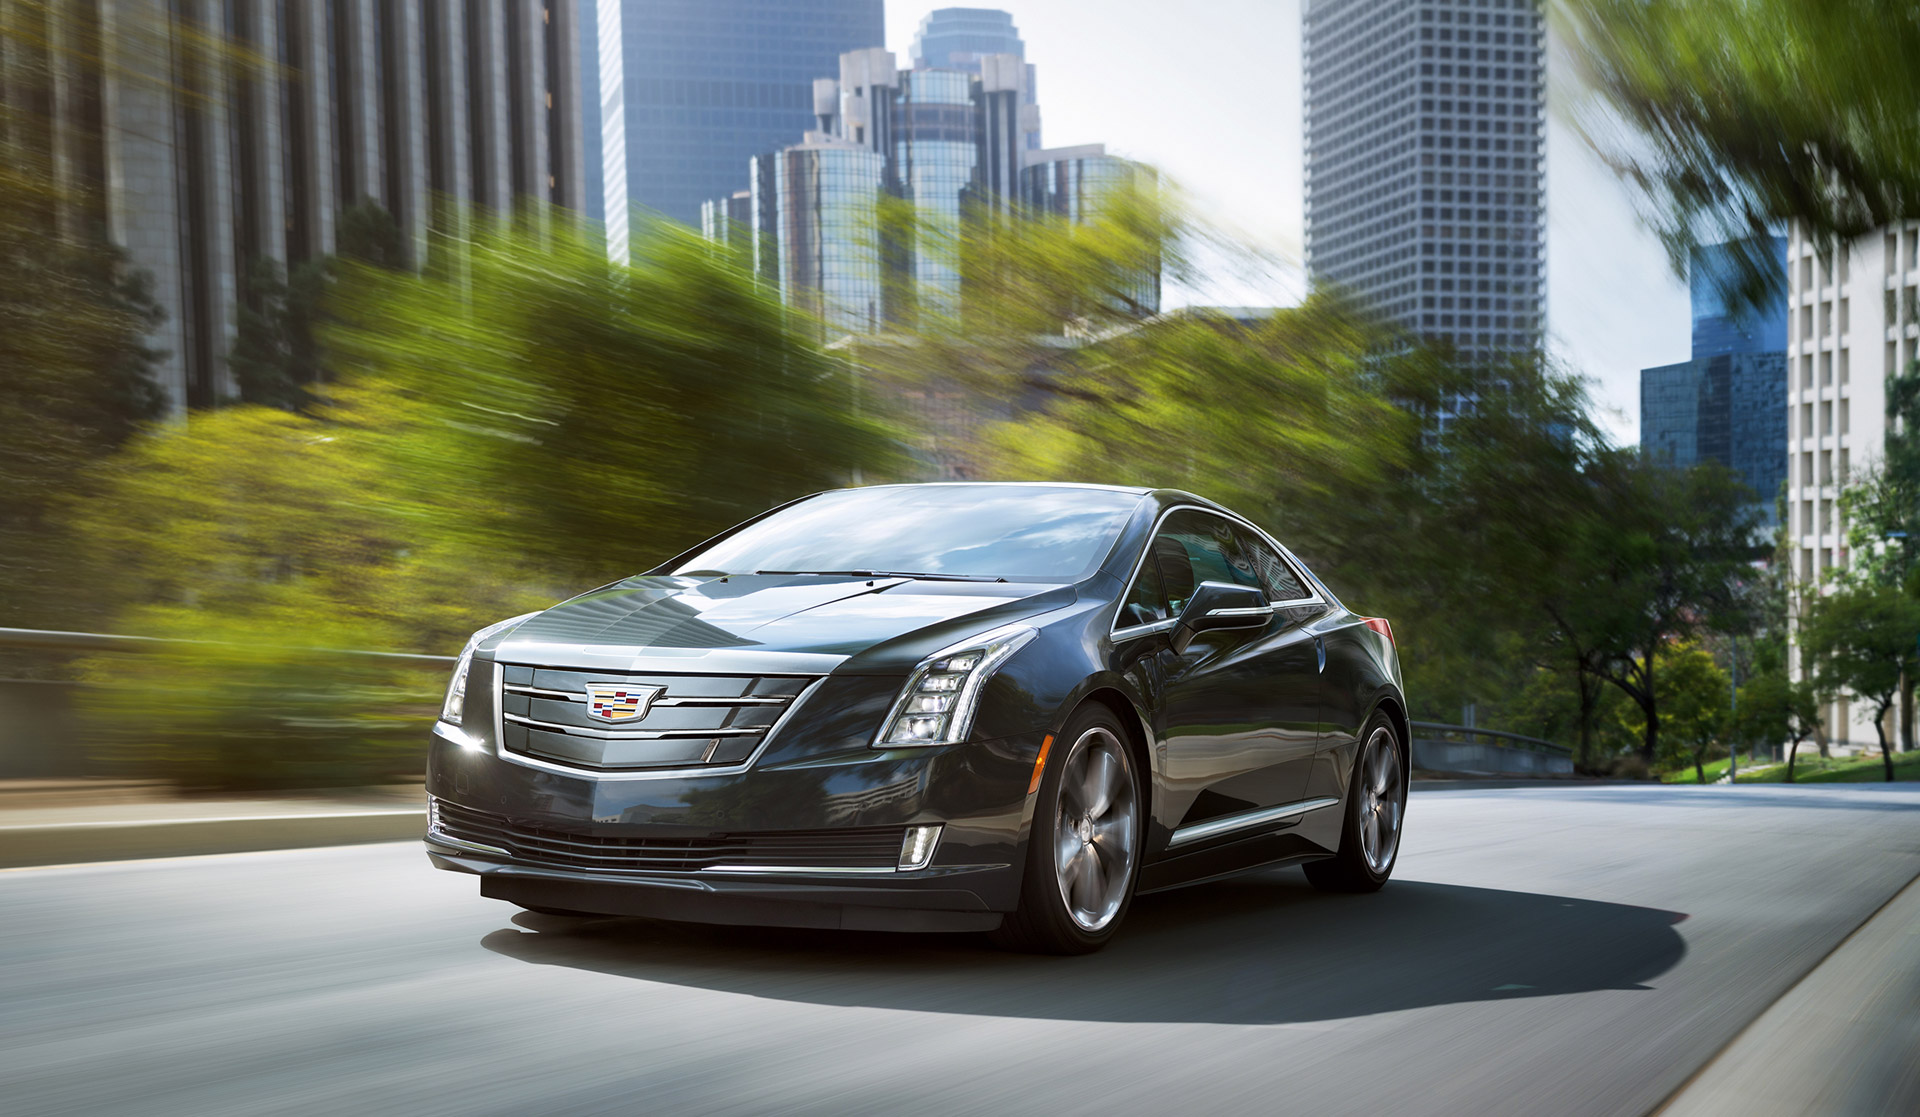 R.I.P. Cadillac ELR: what went wrong with luxury electric coupe?